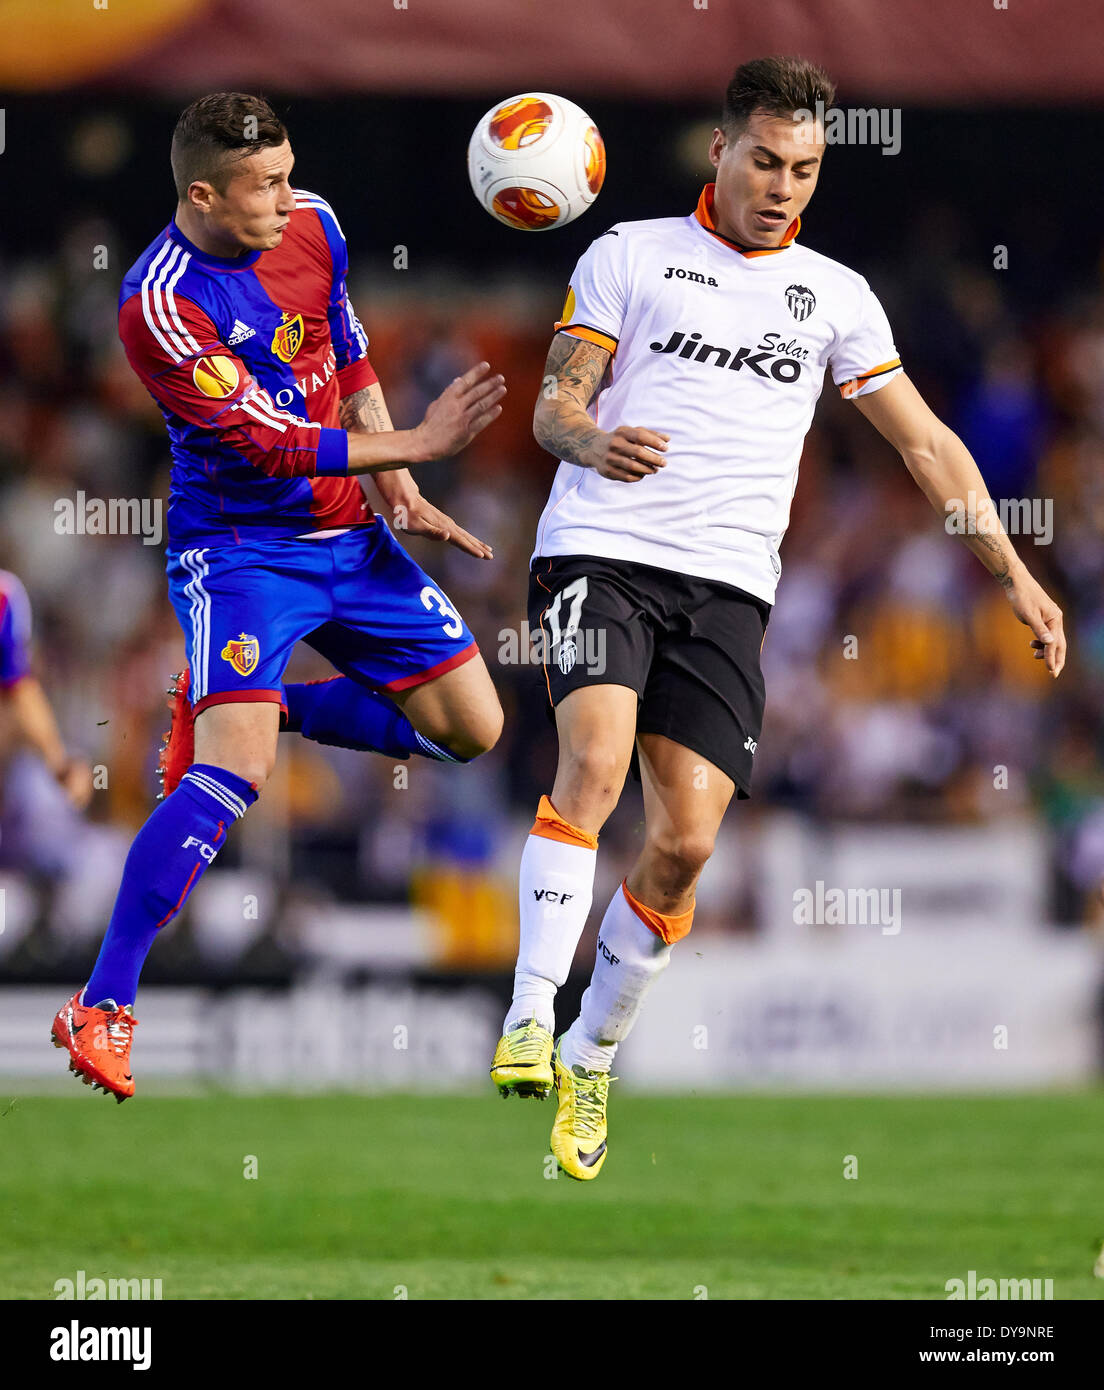 Valencia, Spain. 10th Apr, 2014. Defender Taulant Xhaka of FC Basel (L) duels for a high ball with Midfielder Eduardo Vargas of Valencia CF during the Europa League Game between Valencia CF and FC Basel at Mestalla Stadium, Valencia Credit:  Action Plus Sports/Alamy Live News Stock Photo